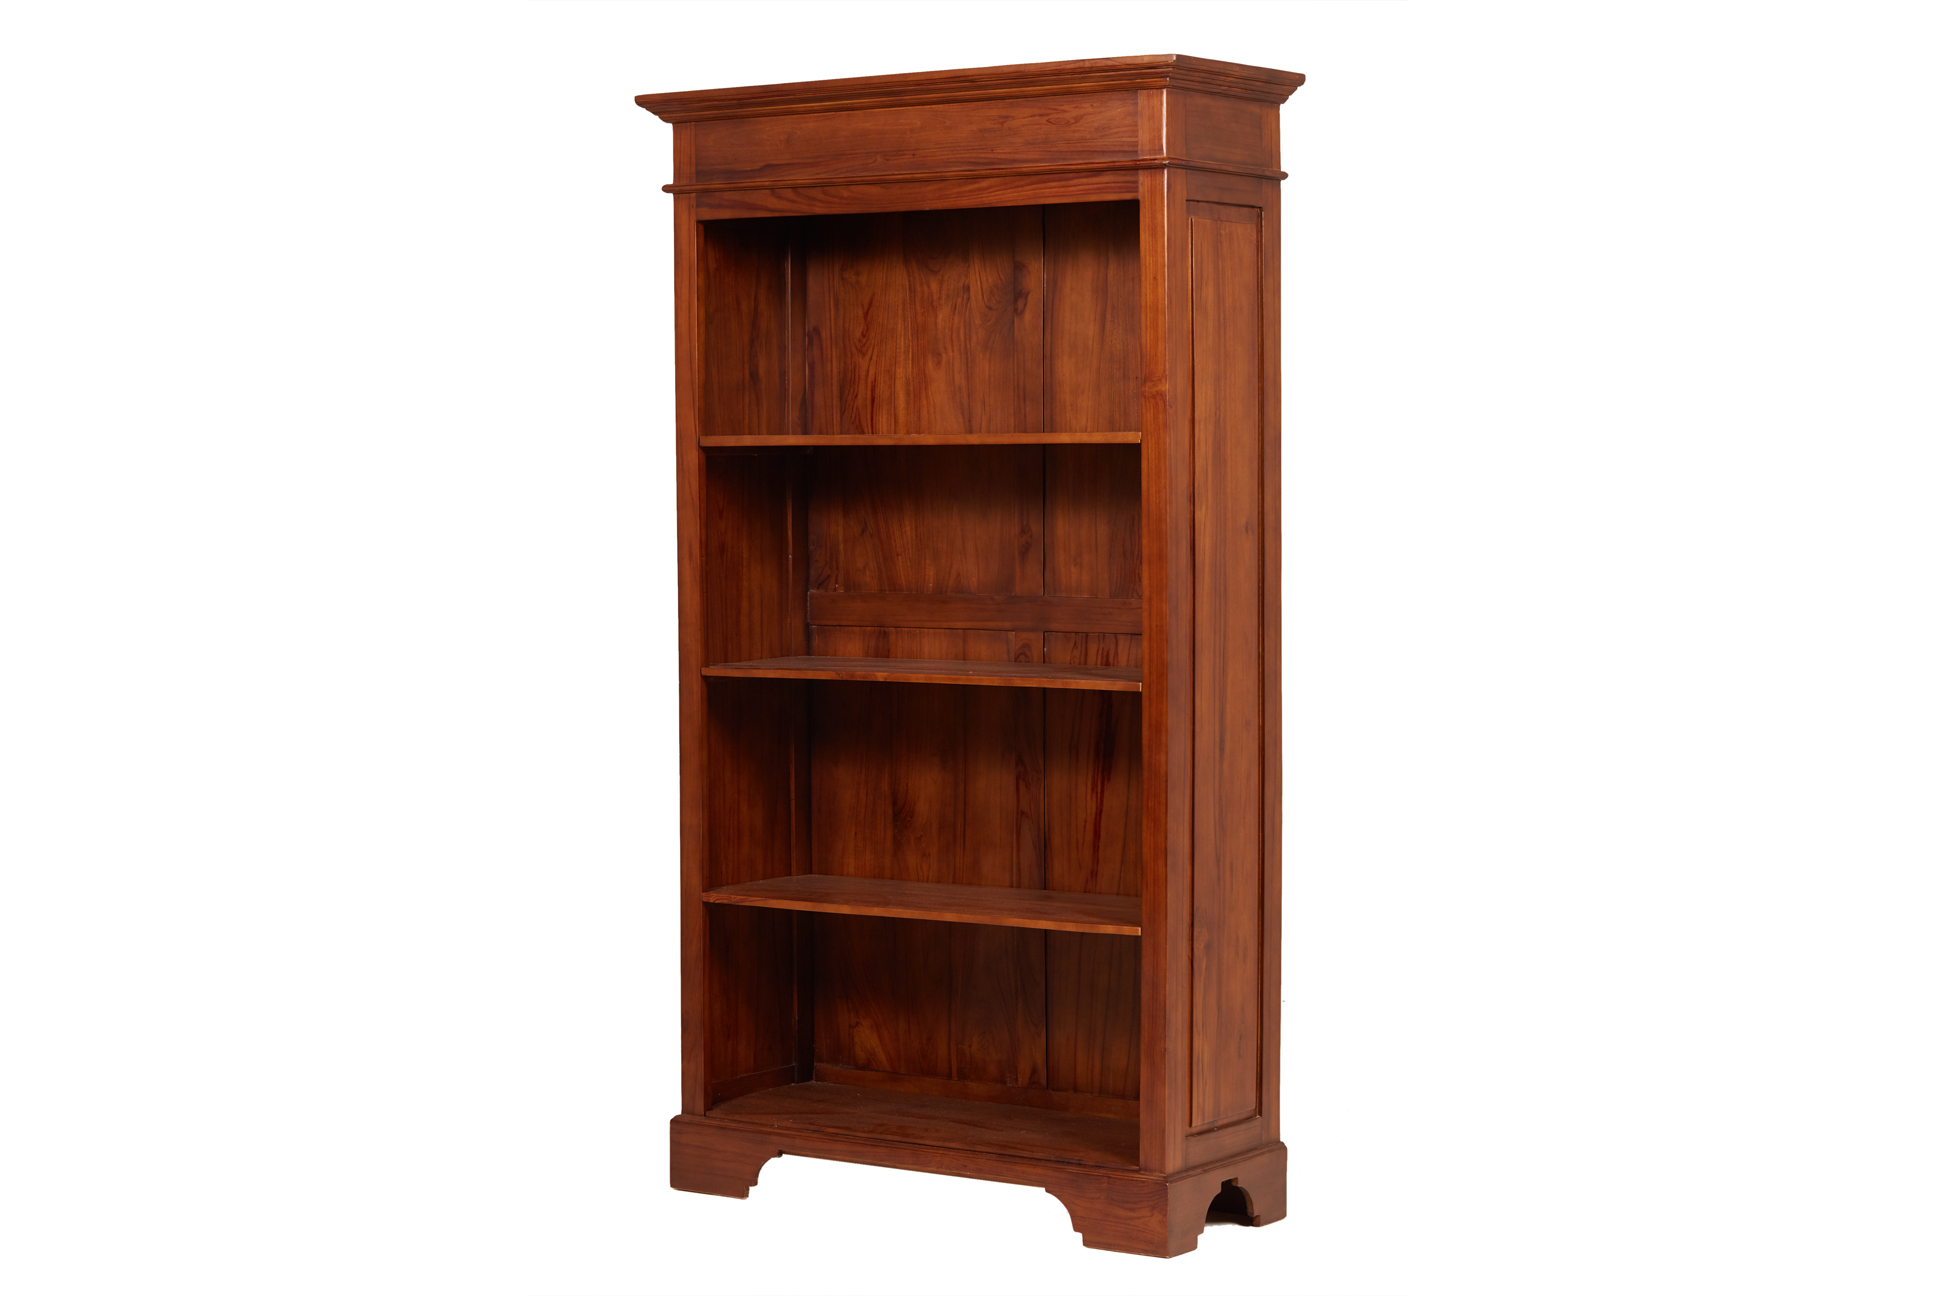 AN OPEN SHELVED BOOKCASE (1 OF 2)